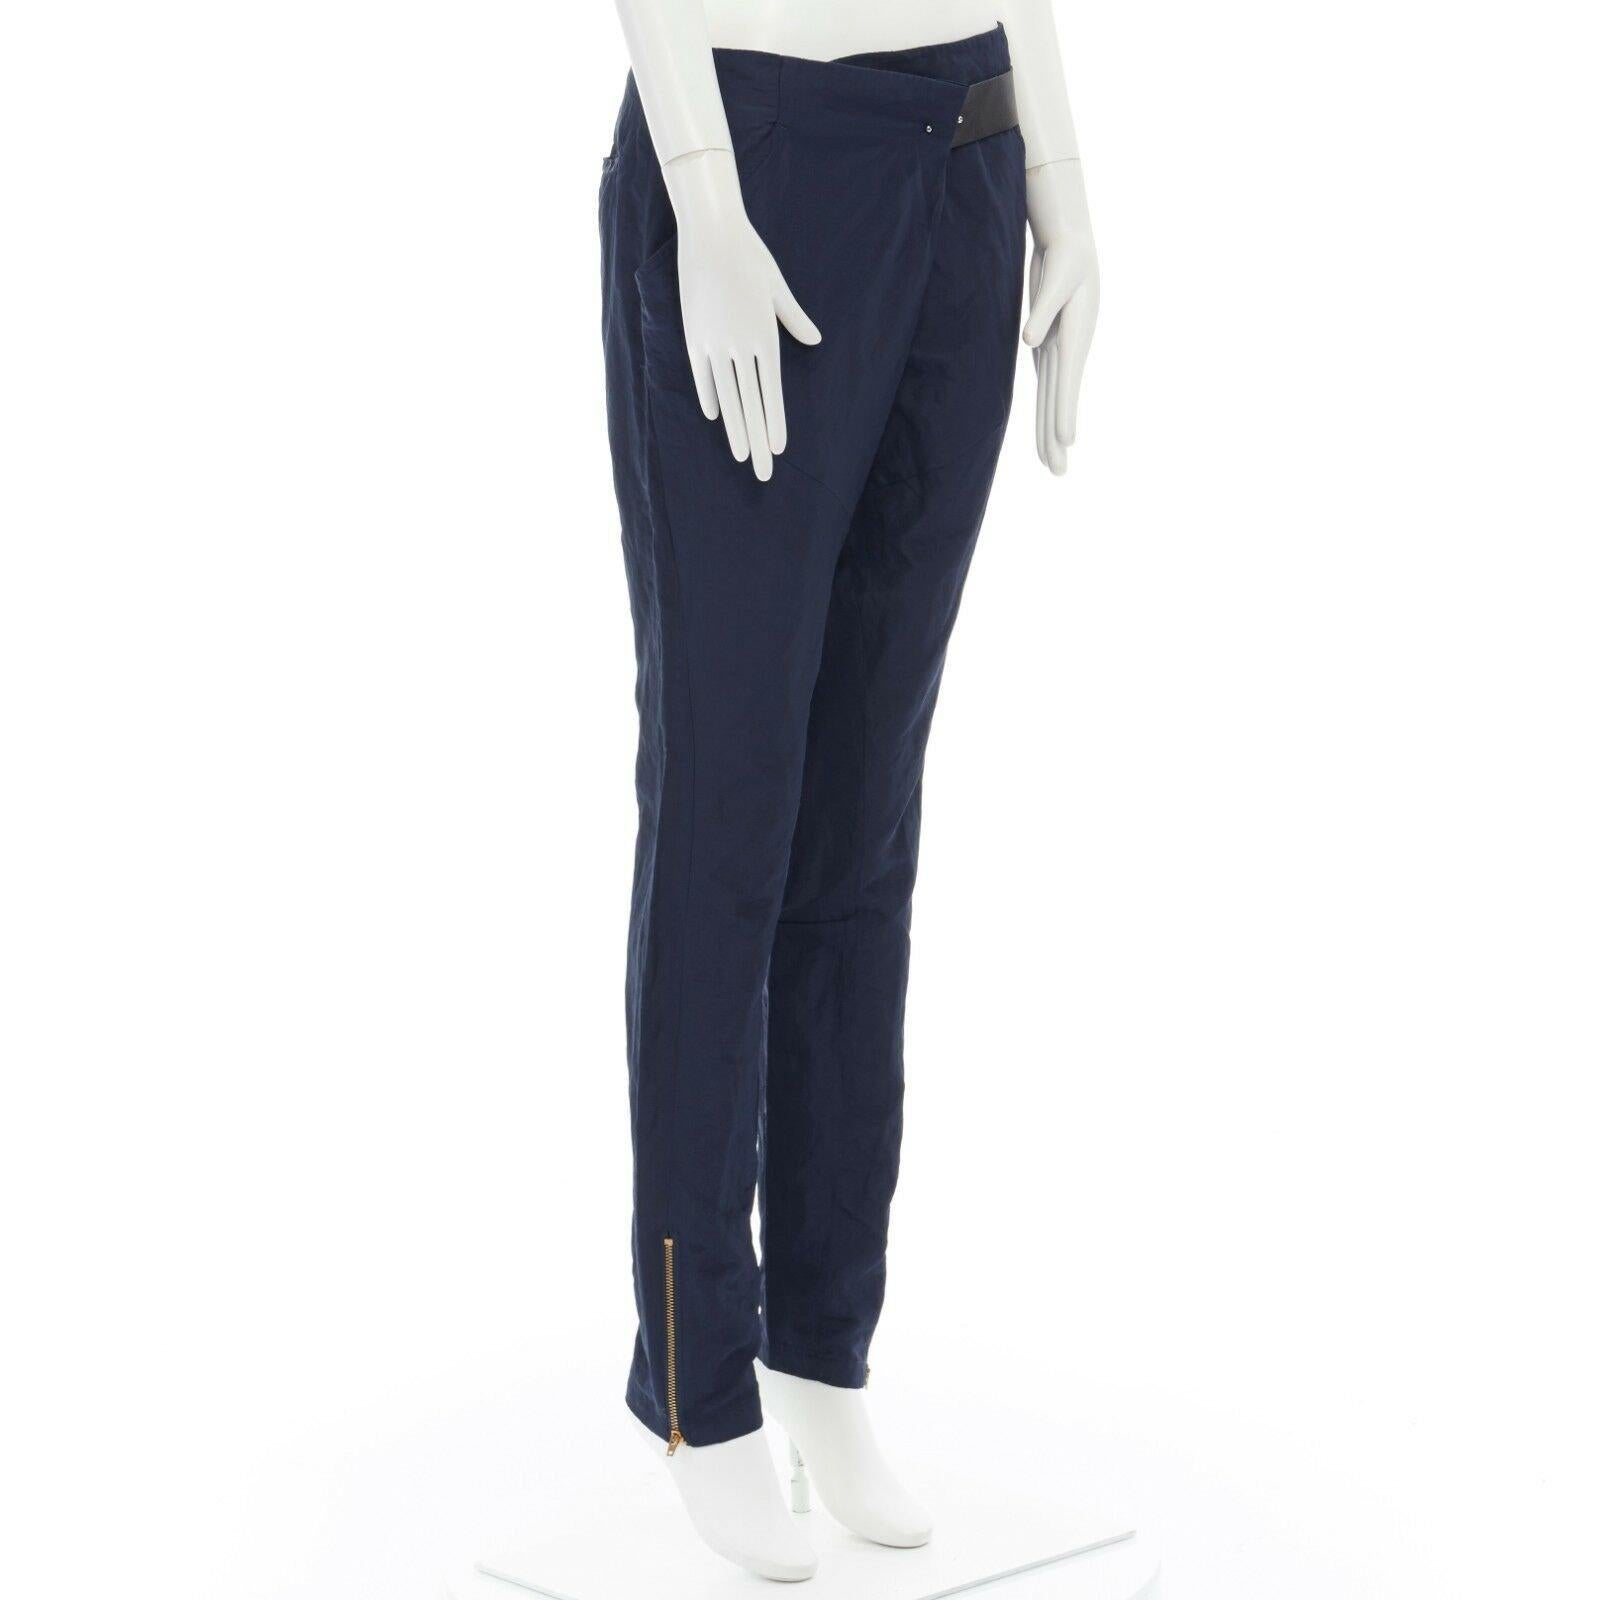 TOGA ARCHIVES navy blue faux leather belt fold over waist zip hem pants JP1 S 
Reference: JETI/A00104 
Brand: Toga Archives 
Material: Nylon 
Color: Blue 
Pattern: Solid 
Closure: Zip 
Extra Detail: Nylon blend. Navy blue. Fold over waist detail.